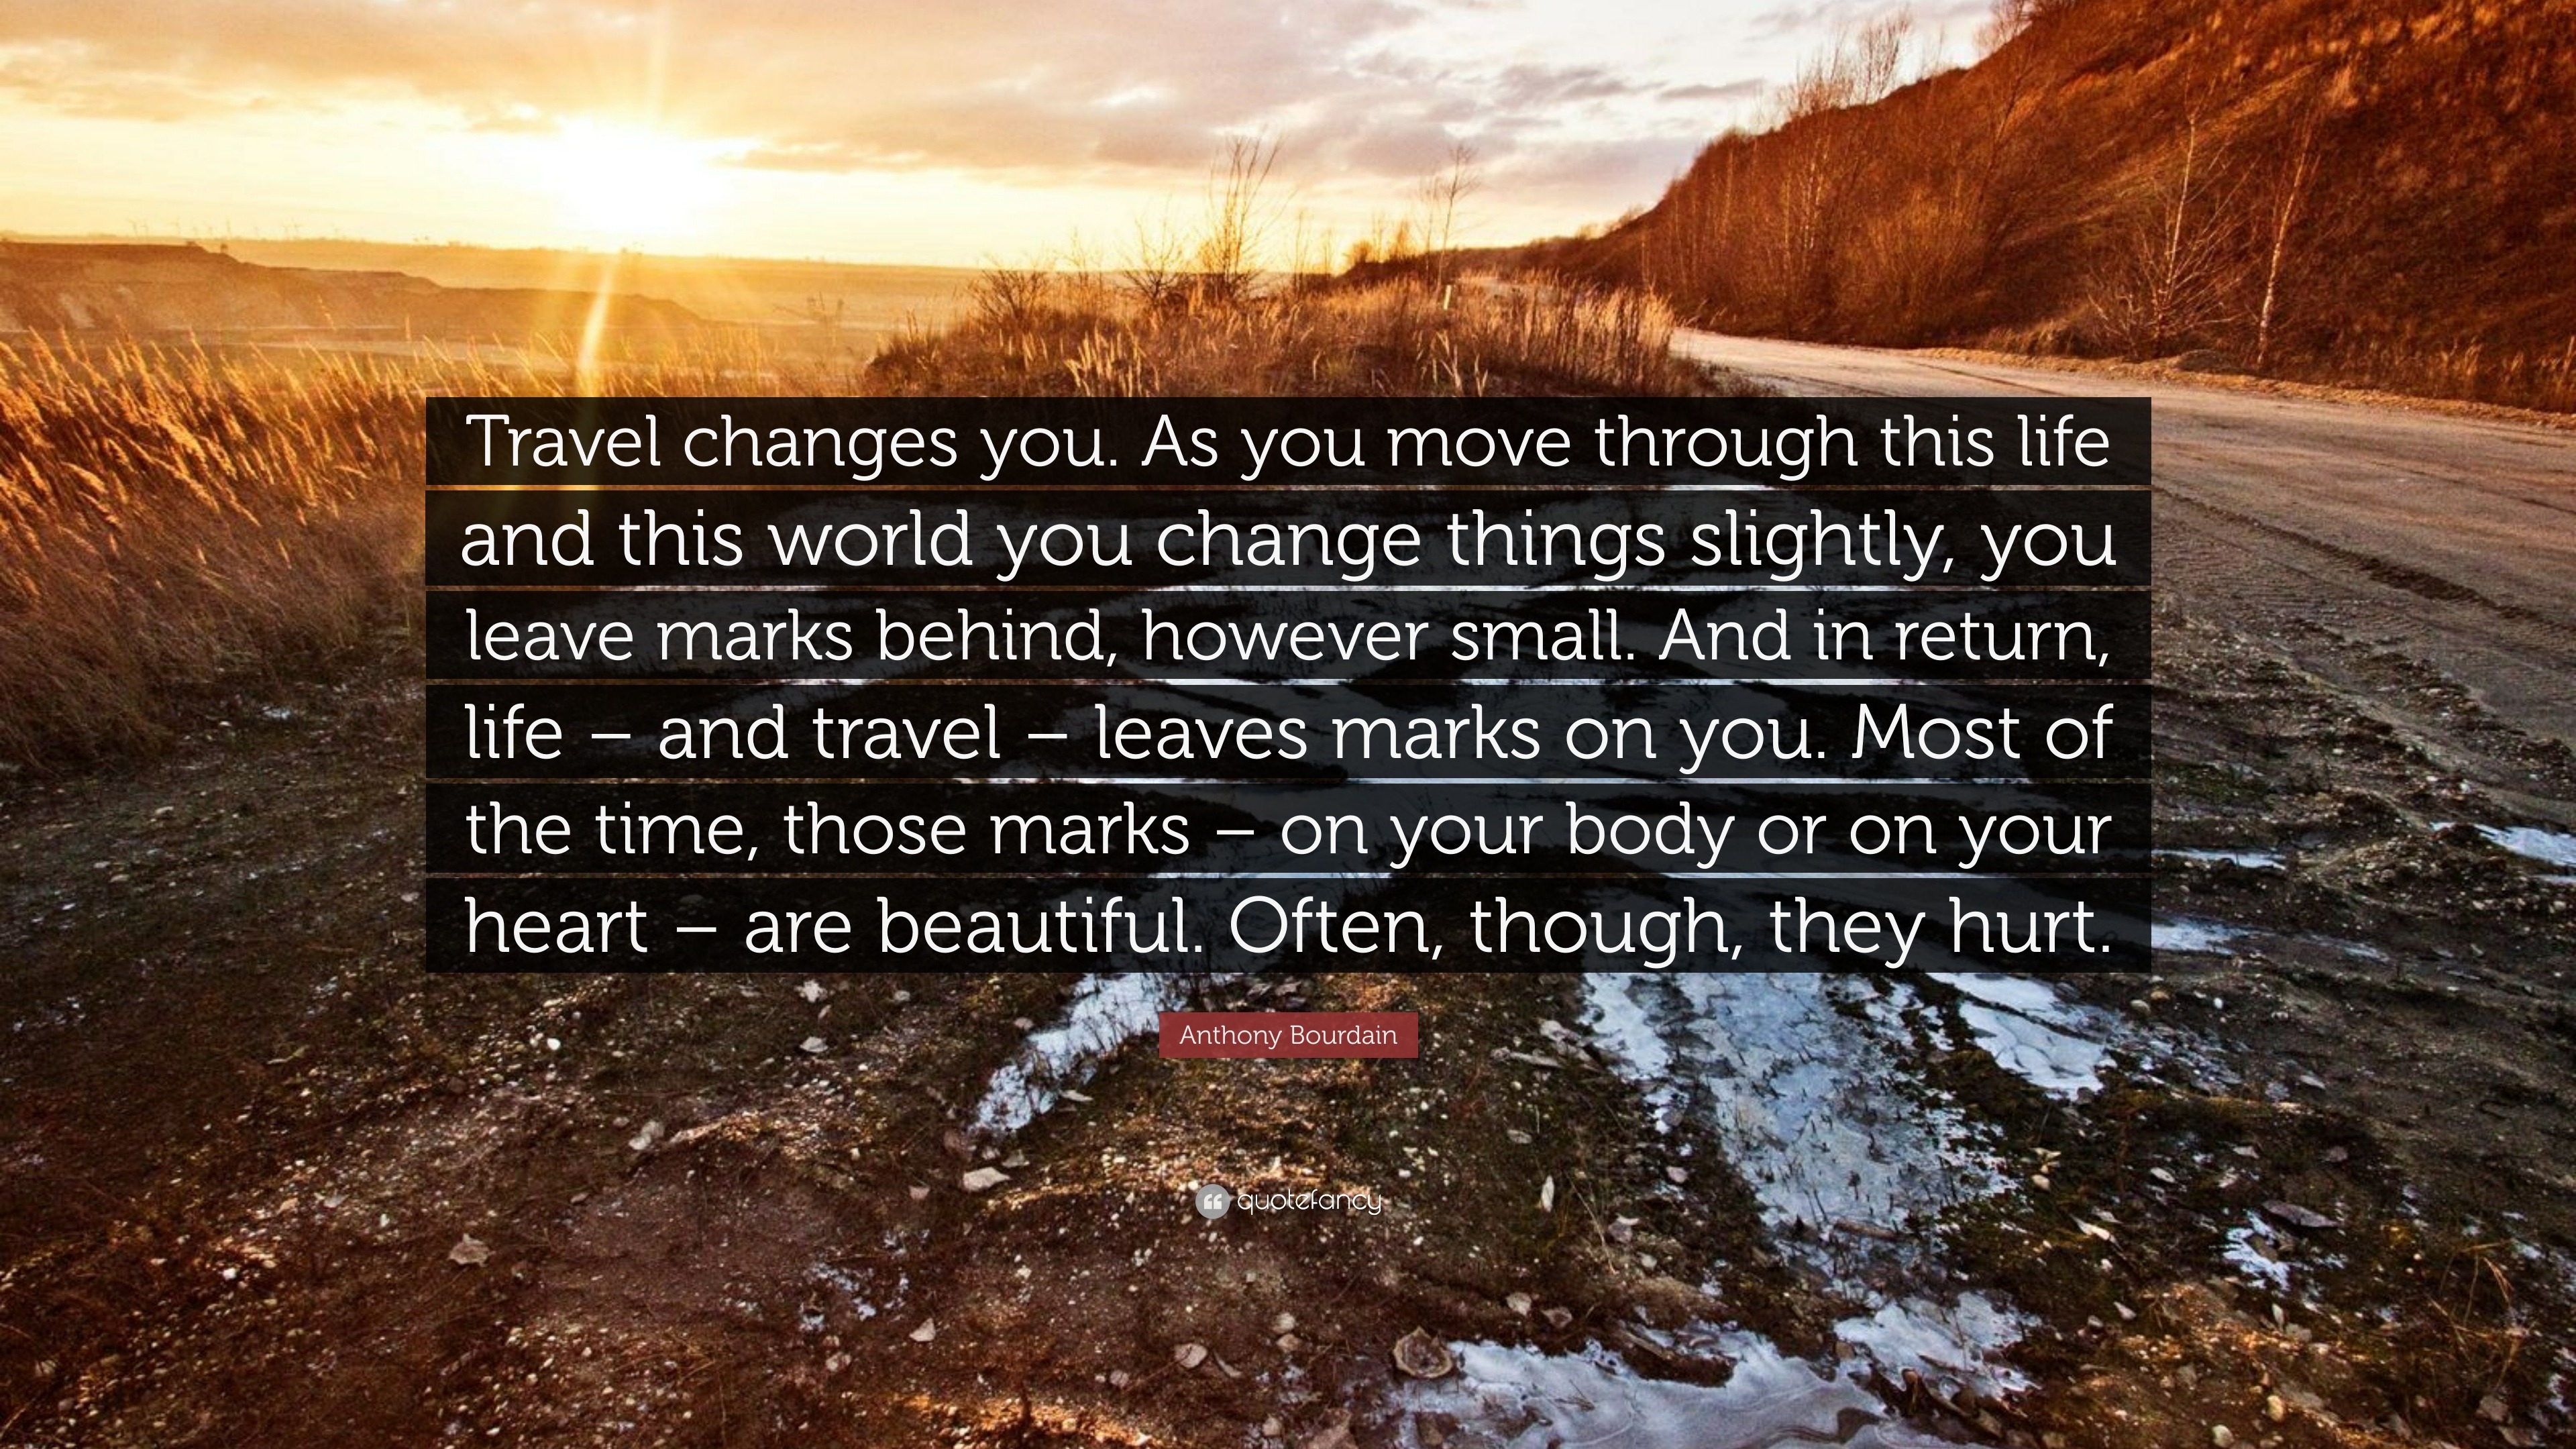 Anthony Bourdain Quote: “Travel changes you. As you move through this